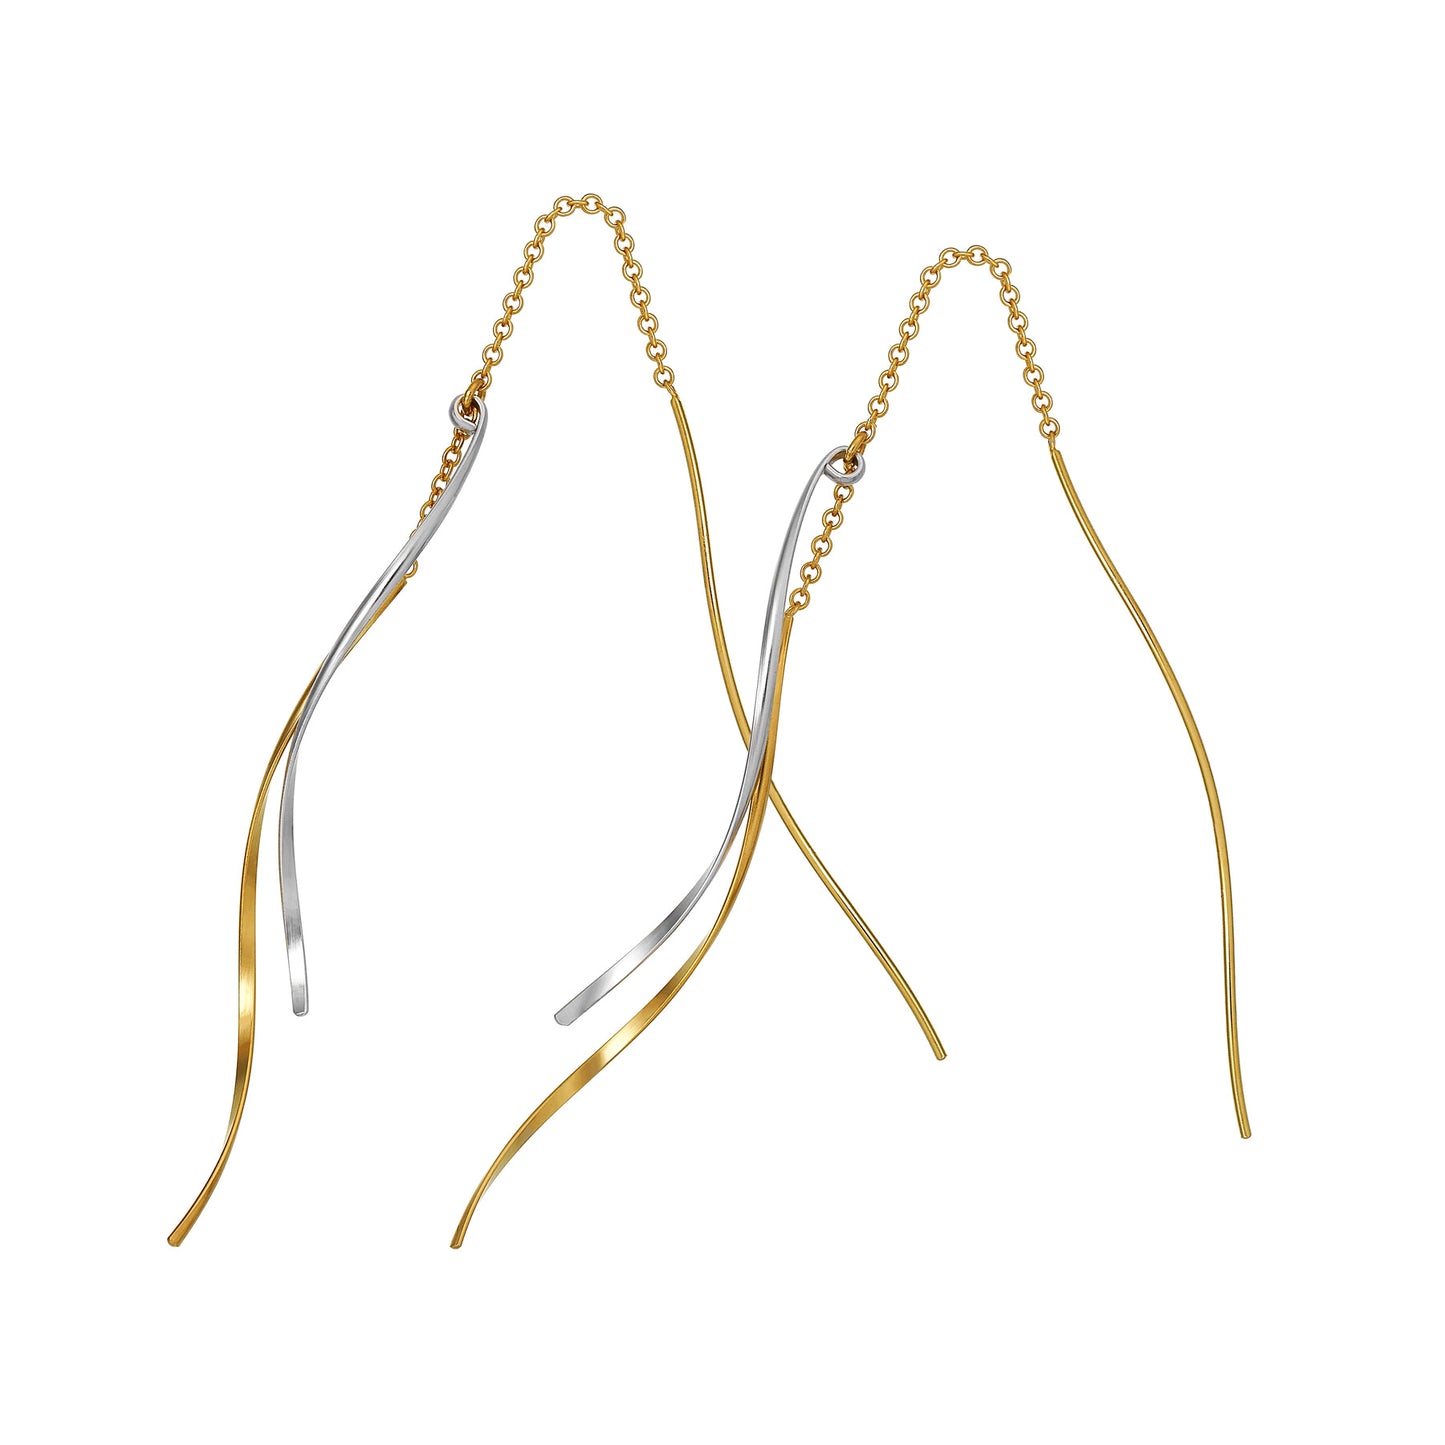 Gold Filled Wave Line Threader Earrings (Platinum Plated / Yellow Gold Filled) - Product Image